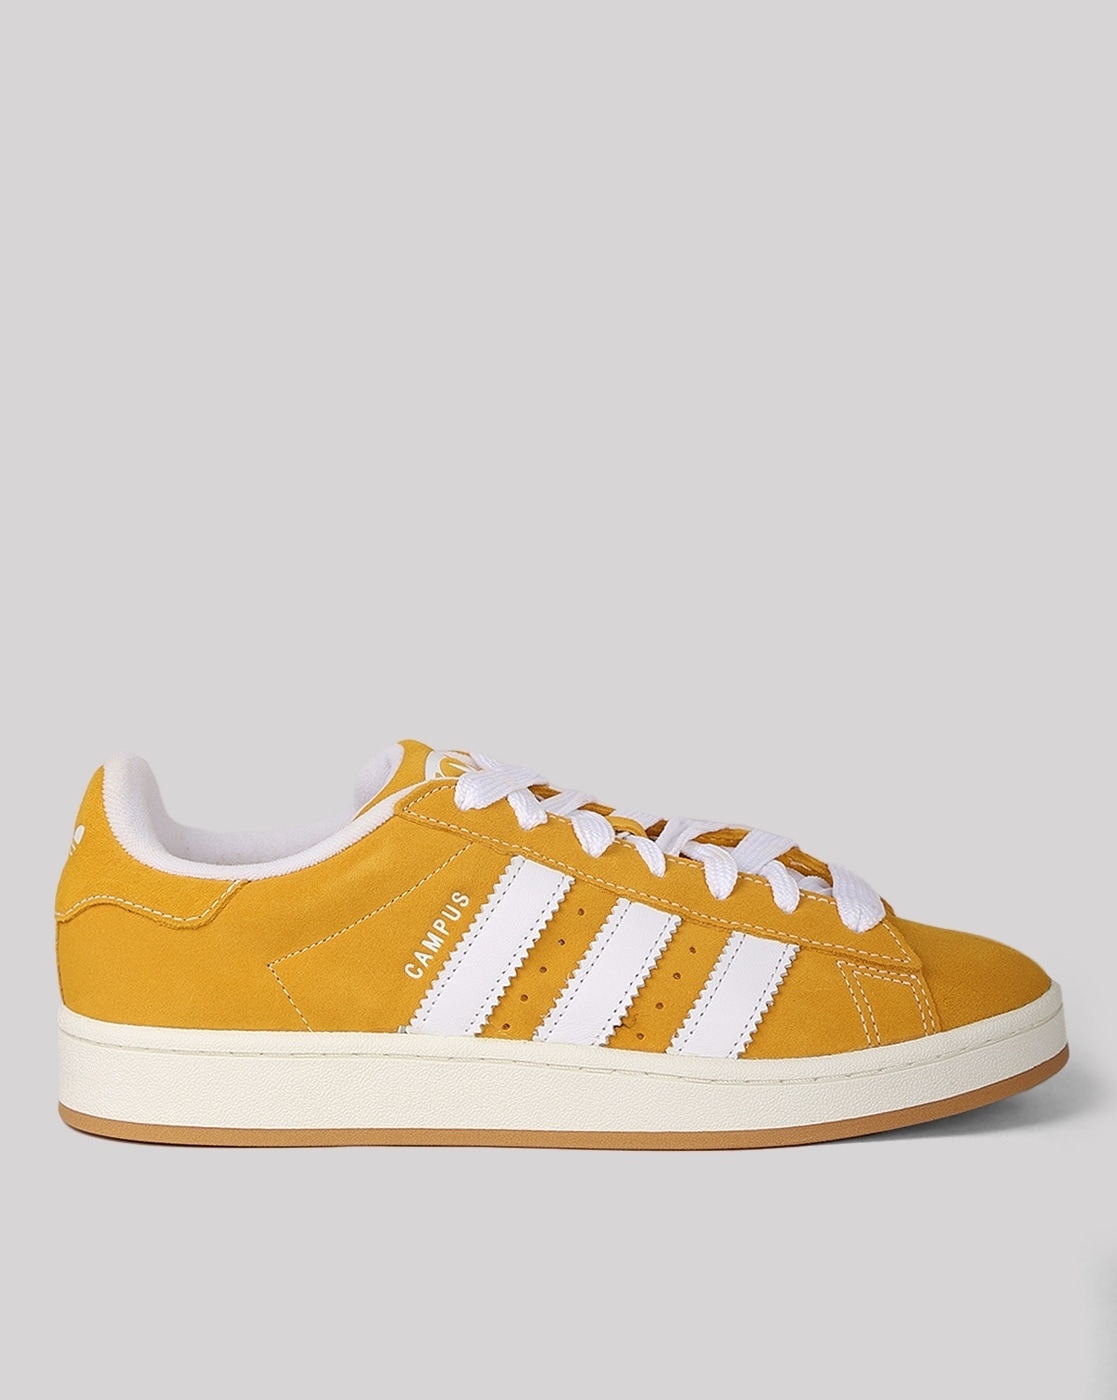 Buy Yellow Shoes for Men by Adidas Originals Online |